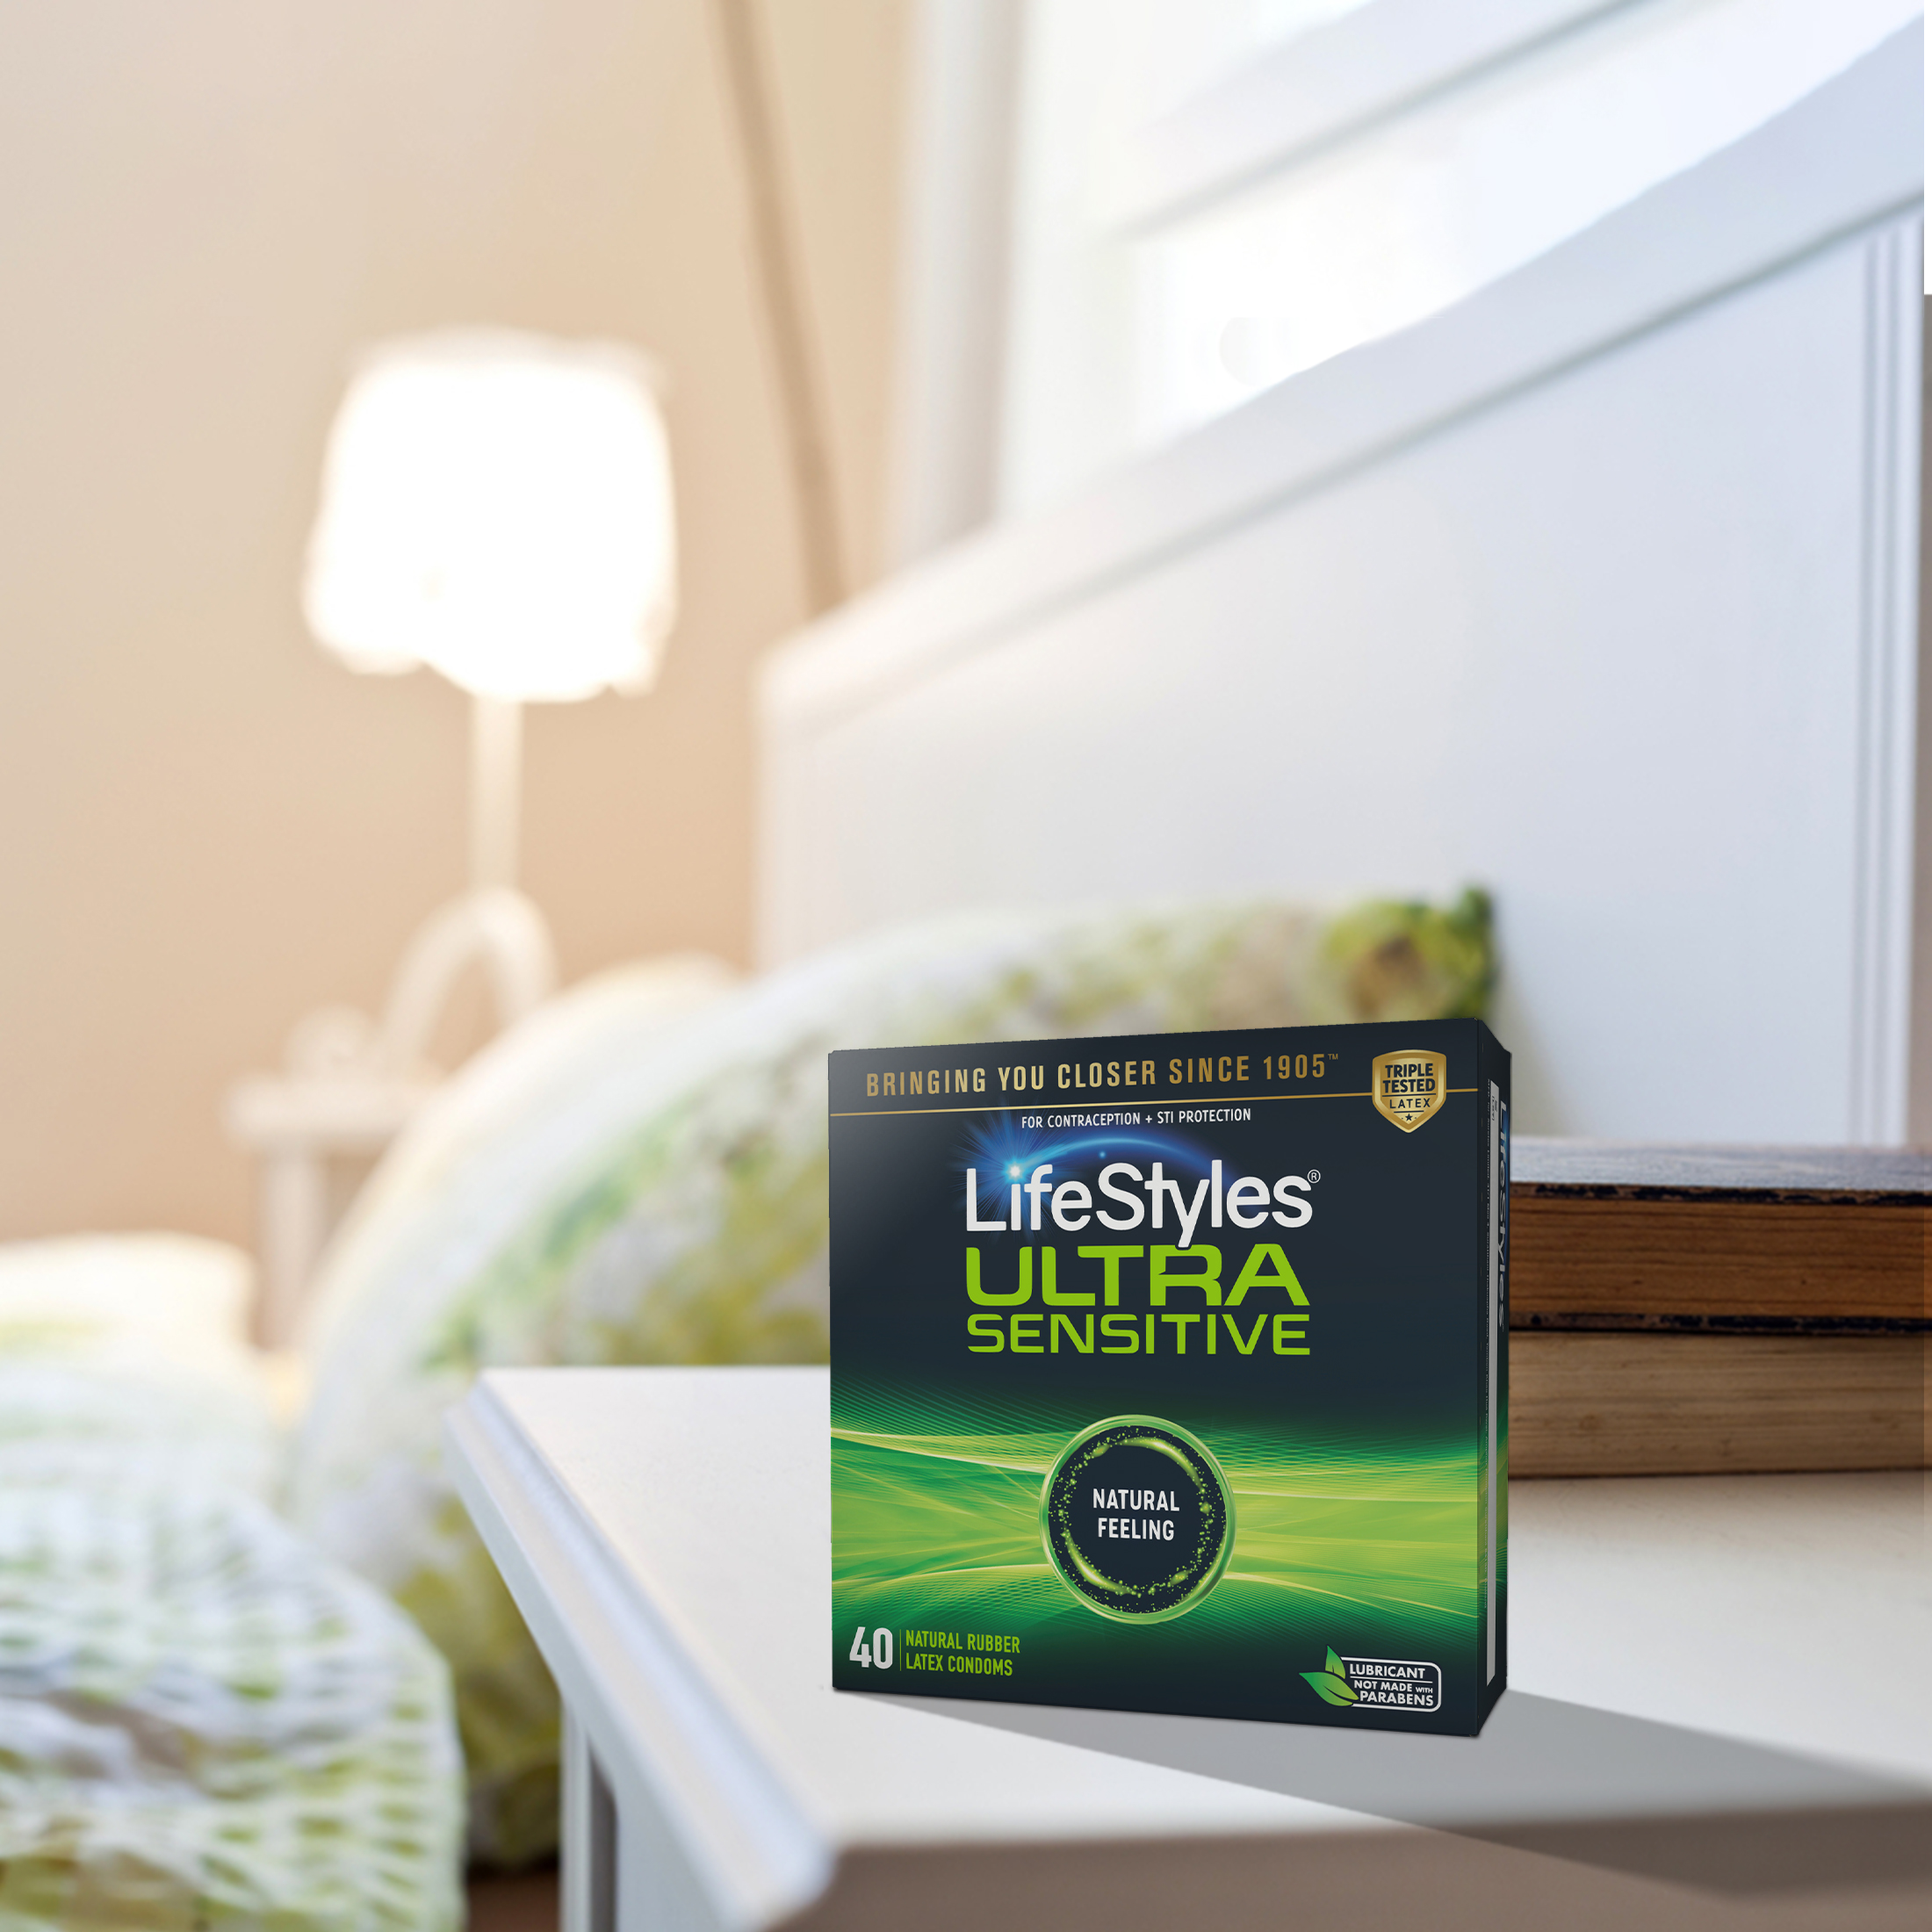 LifeStyles Ultra-Sensitive Lubricated Latex Condoms, 40 Count - image 5 of 7